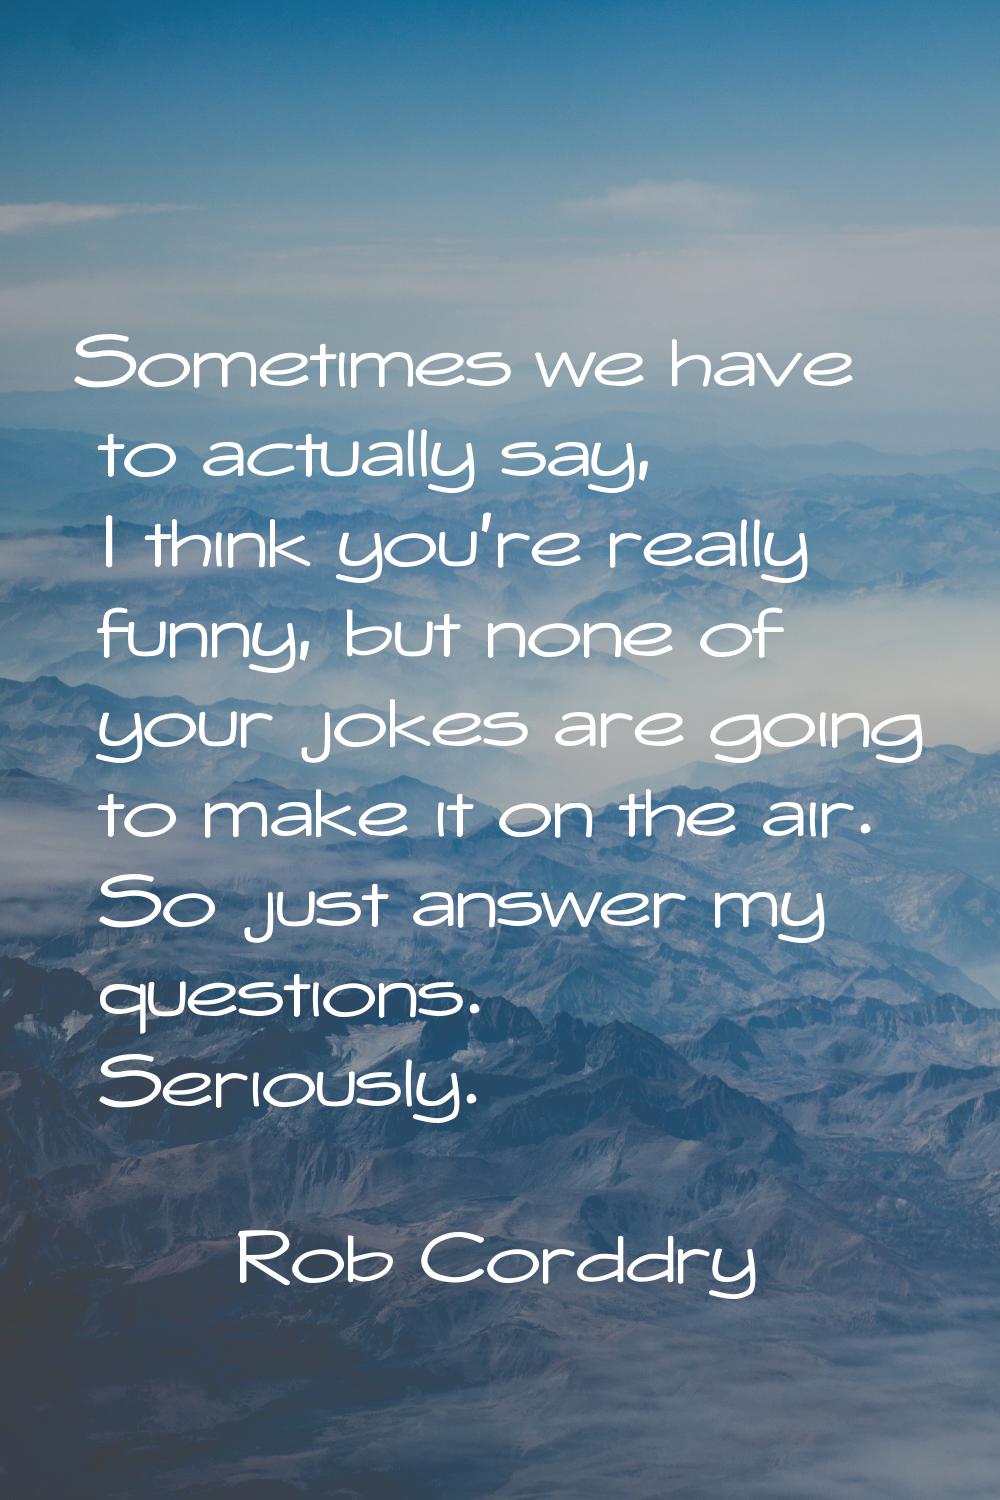 Sometimes we have to actually say, I think you're really funny, but none of your jokes are going to